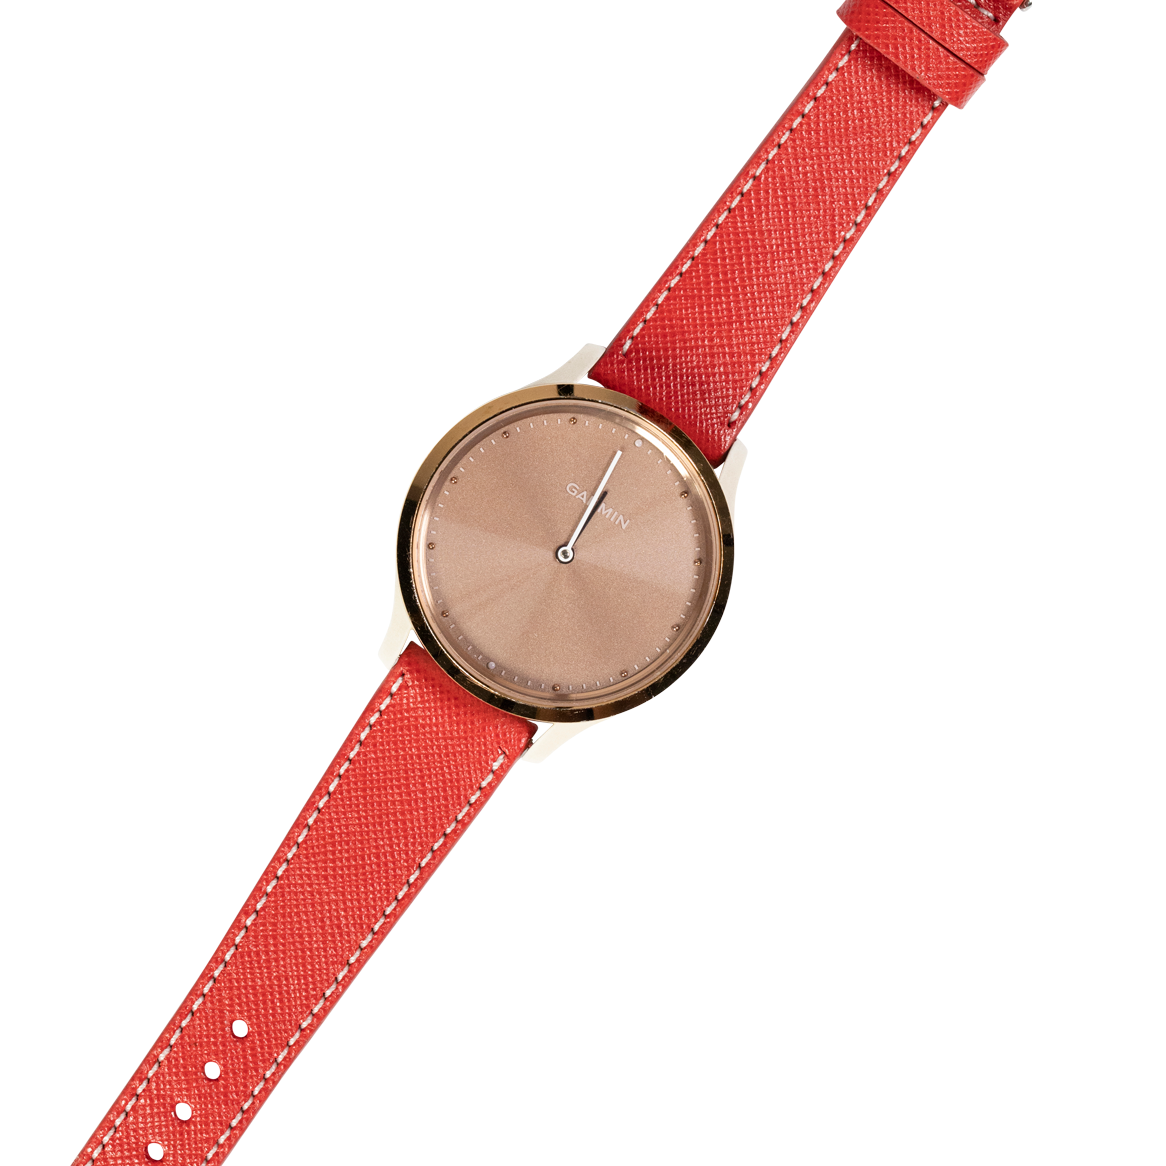 [Quick Release] Saffiano Leather - Red with White Stitching